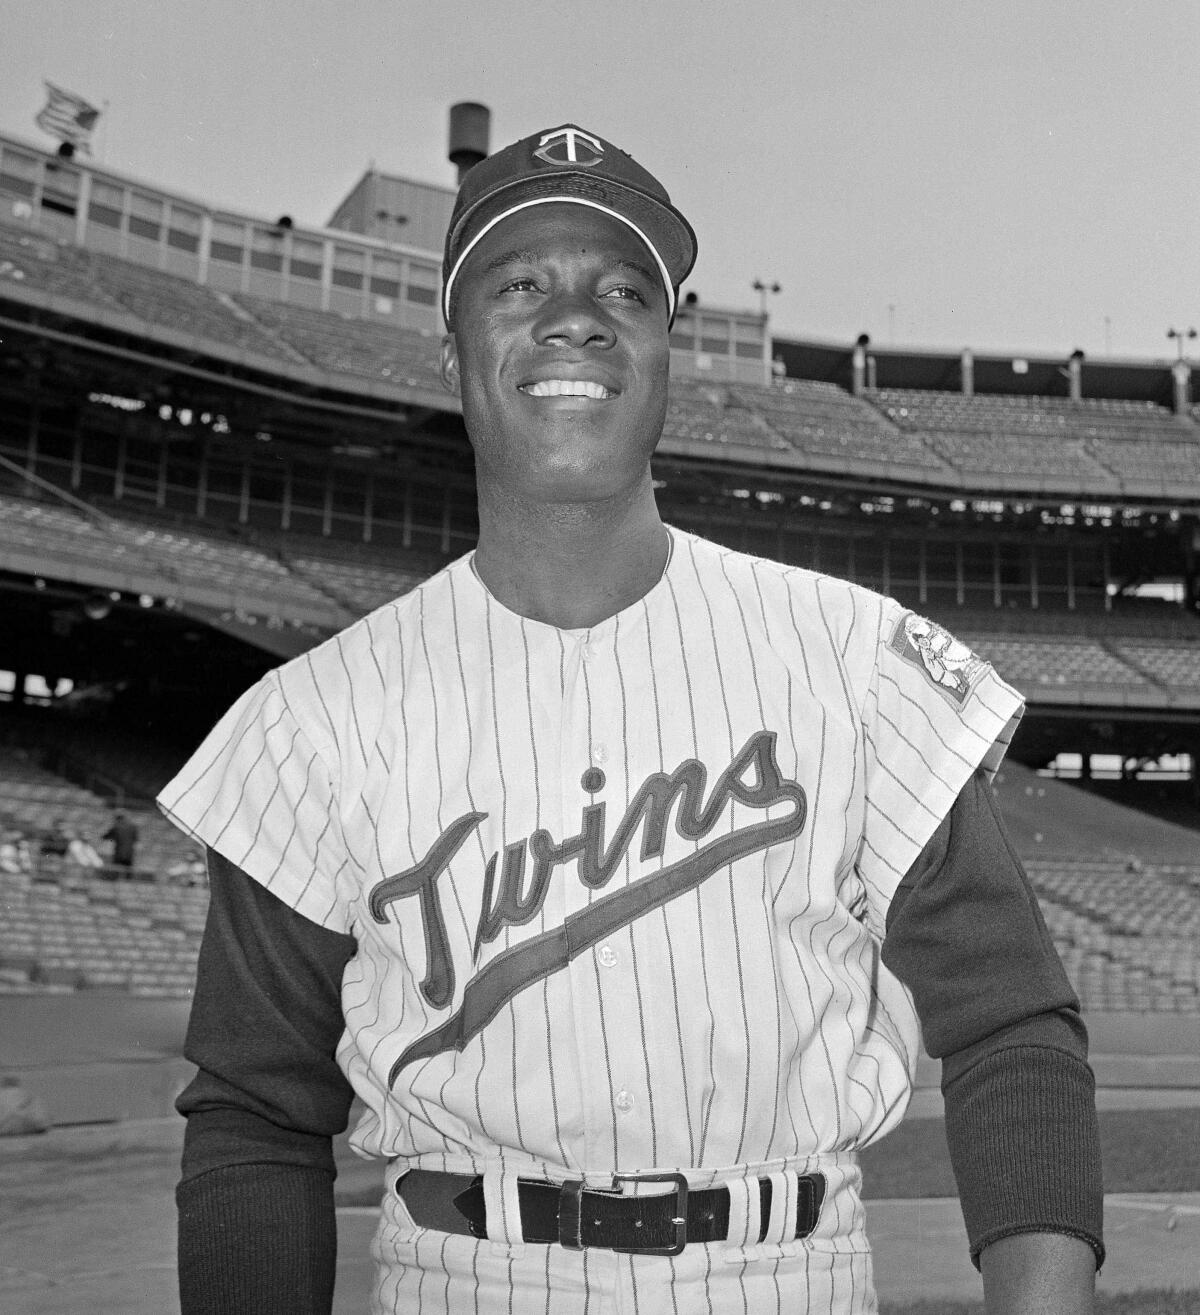 In this June 21, 1964, file photo, Minnesota Twins pitcher Jim "Mudcat" Grant poses.